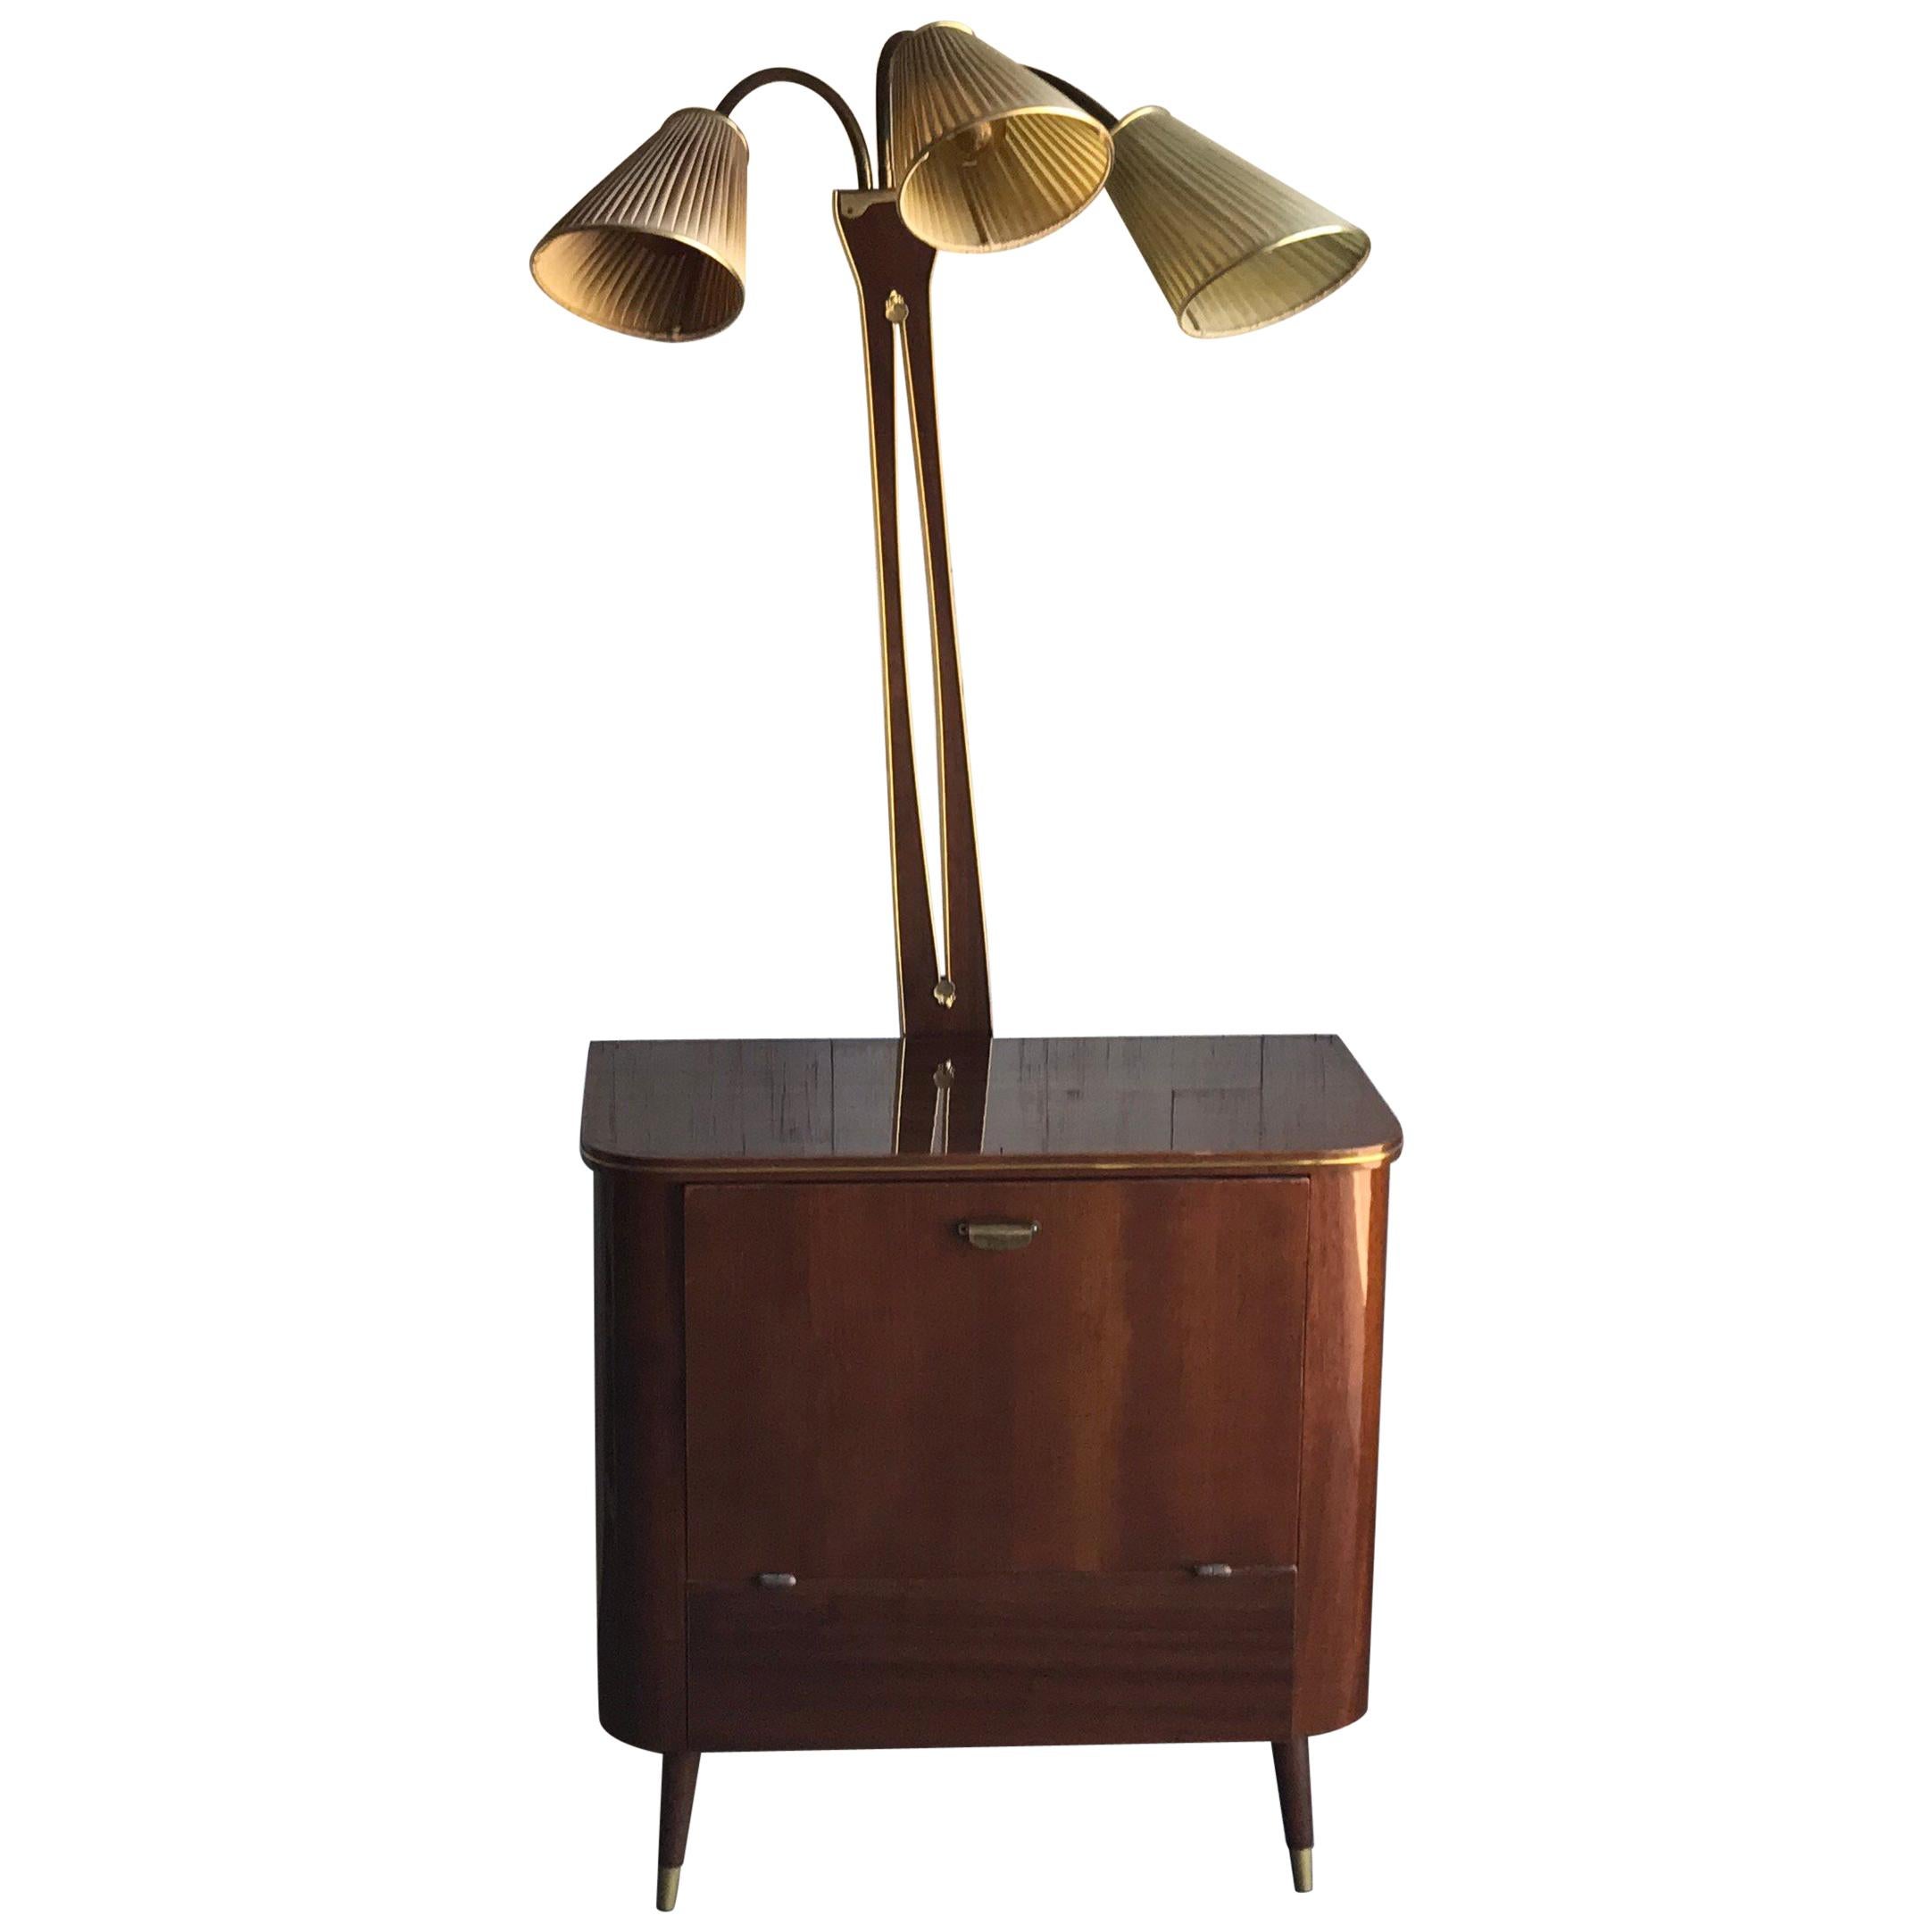 Art Deco 1950s Walnut Drinks Bar Cocktail Liquor Cabinet with Lamp Stand For Sale